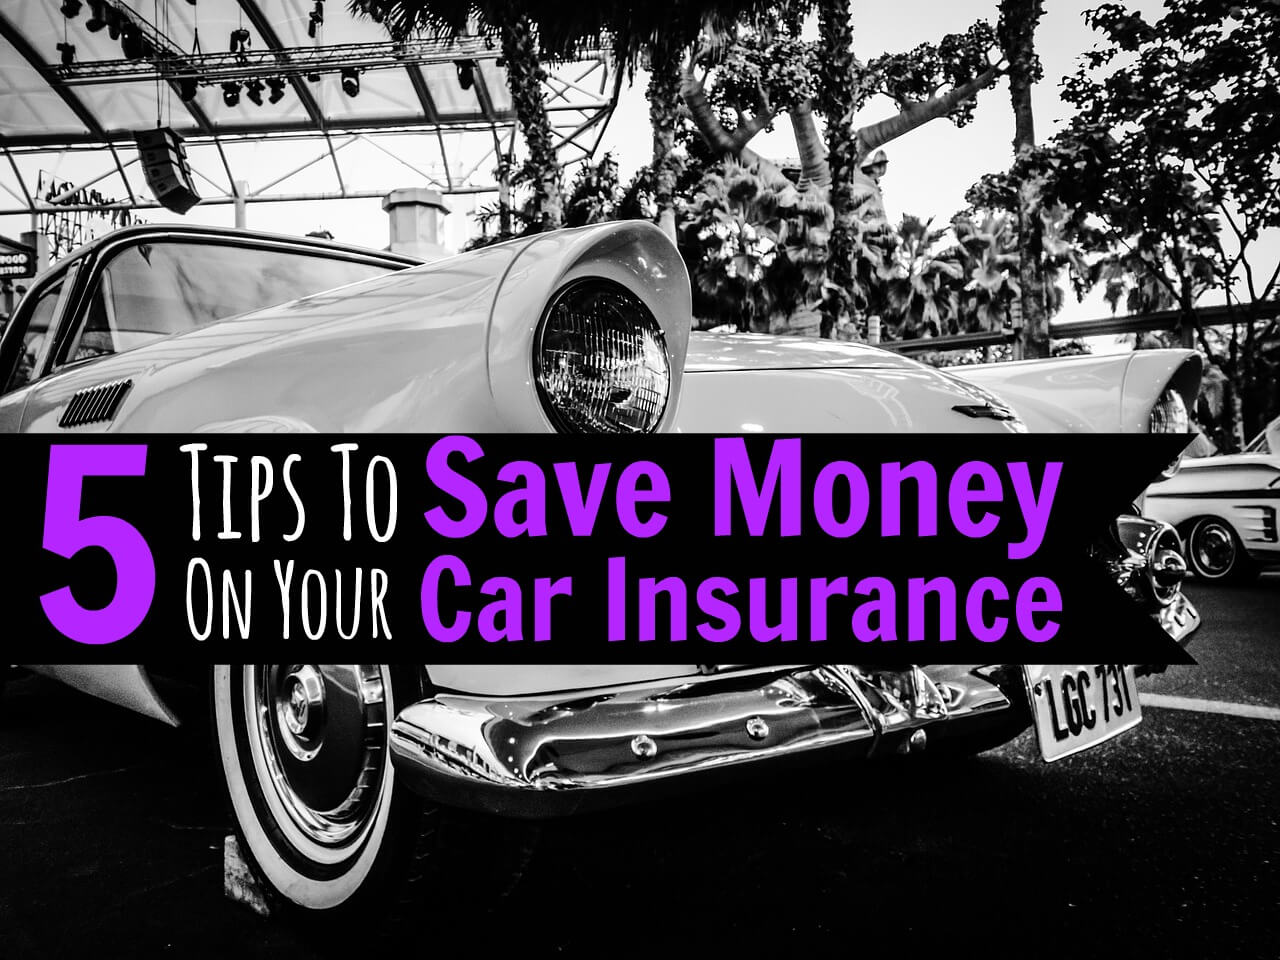 Compare Car Insurance: Find Me The Cheapest Car Insurance